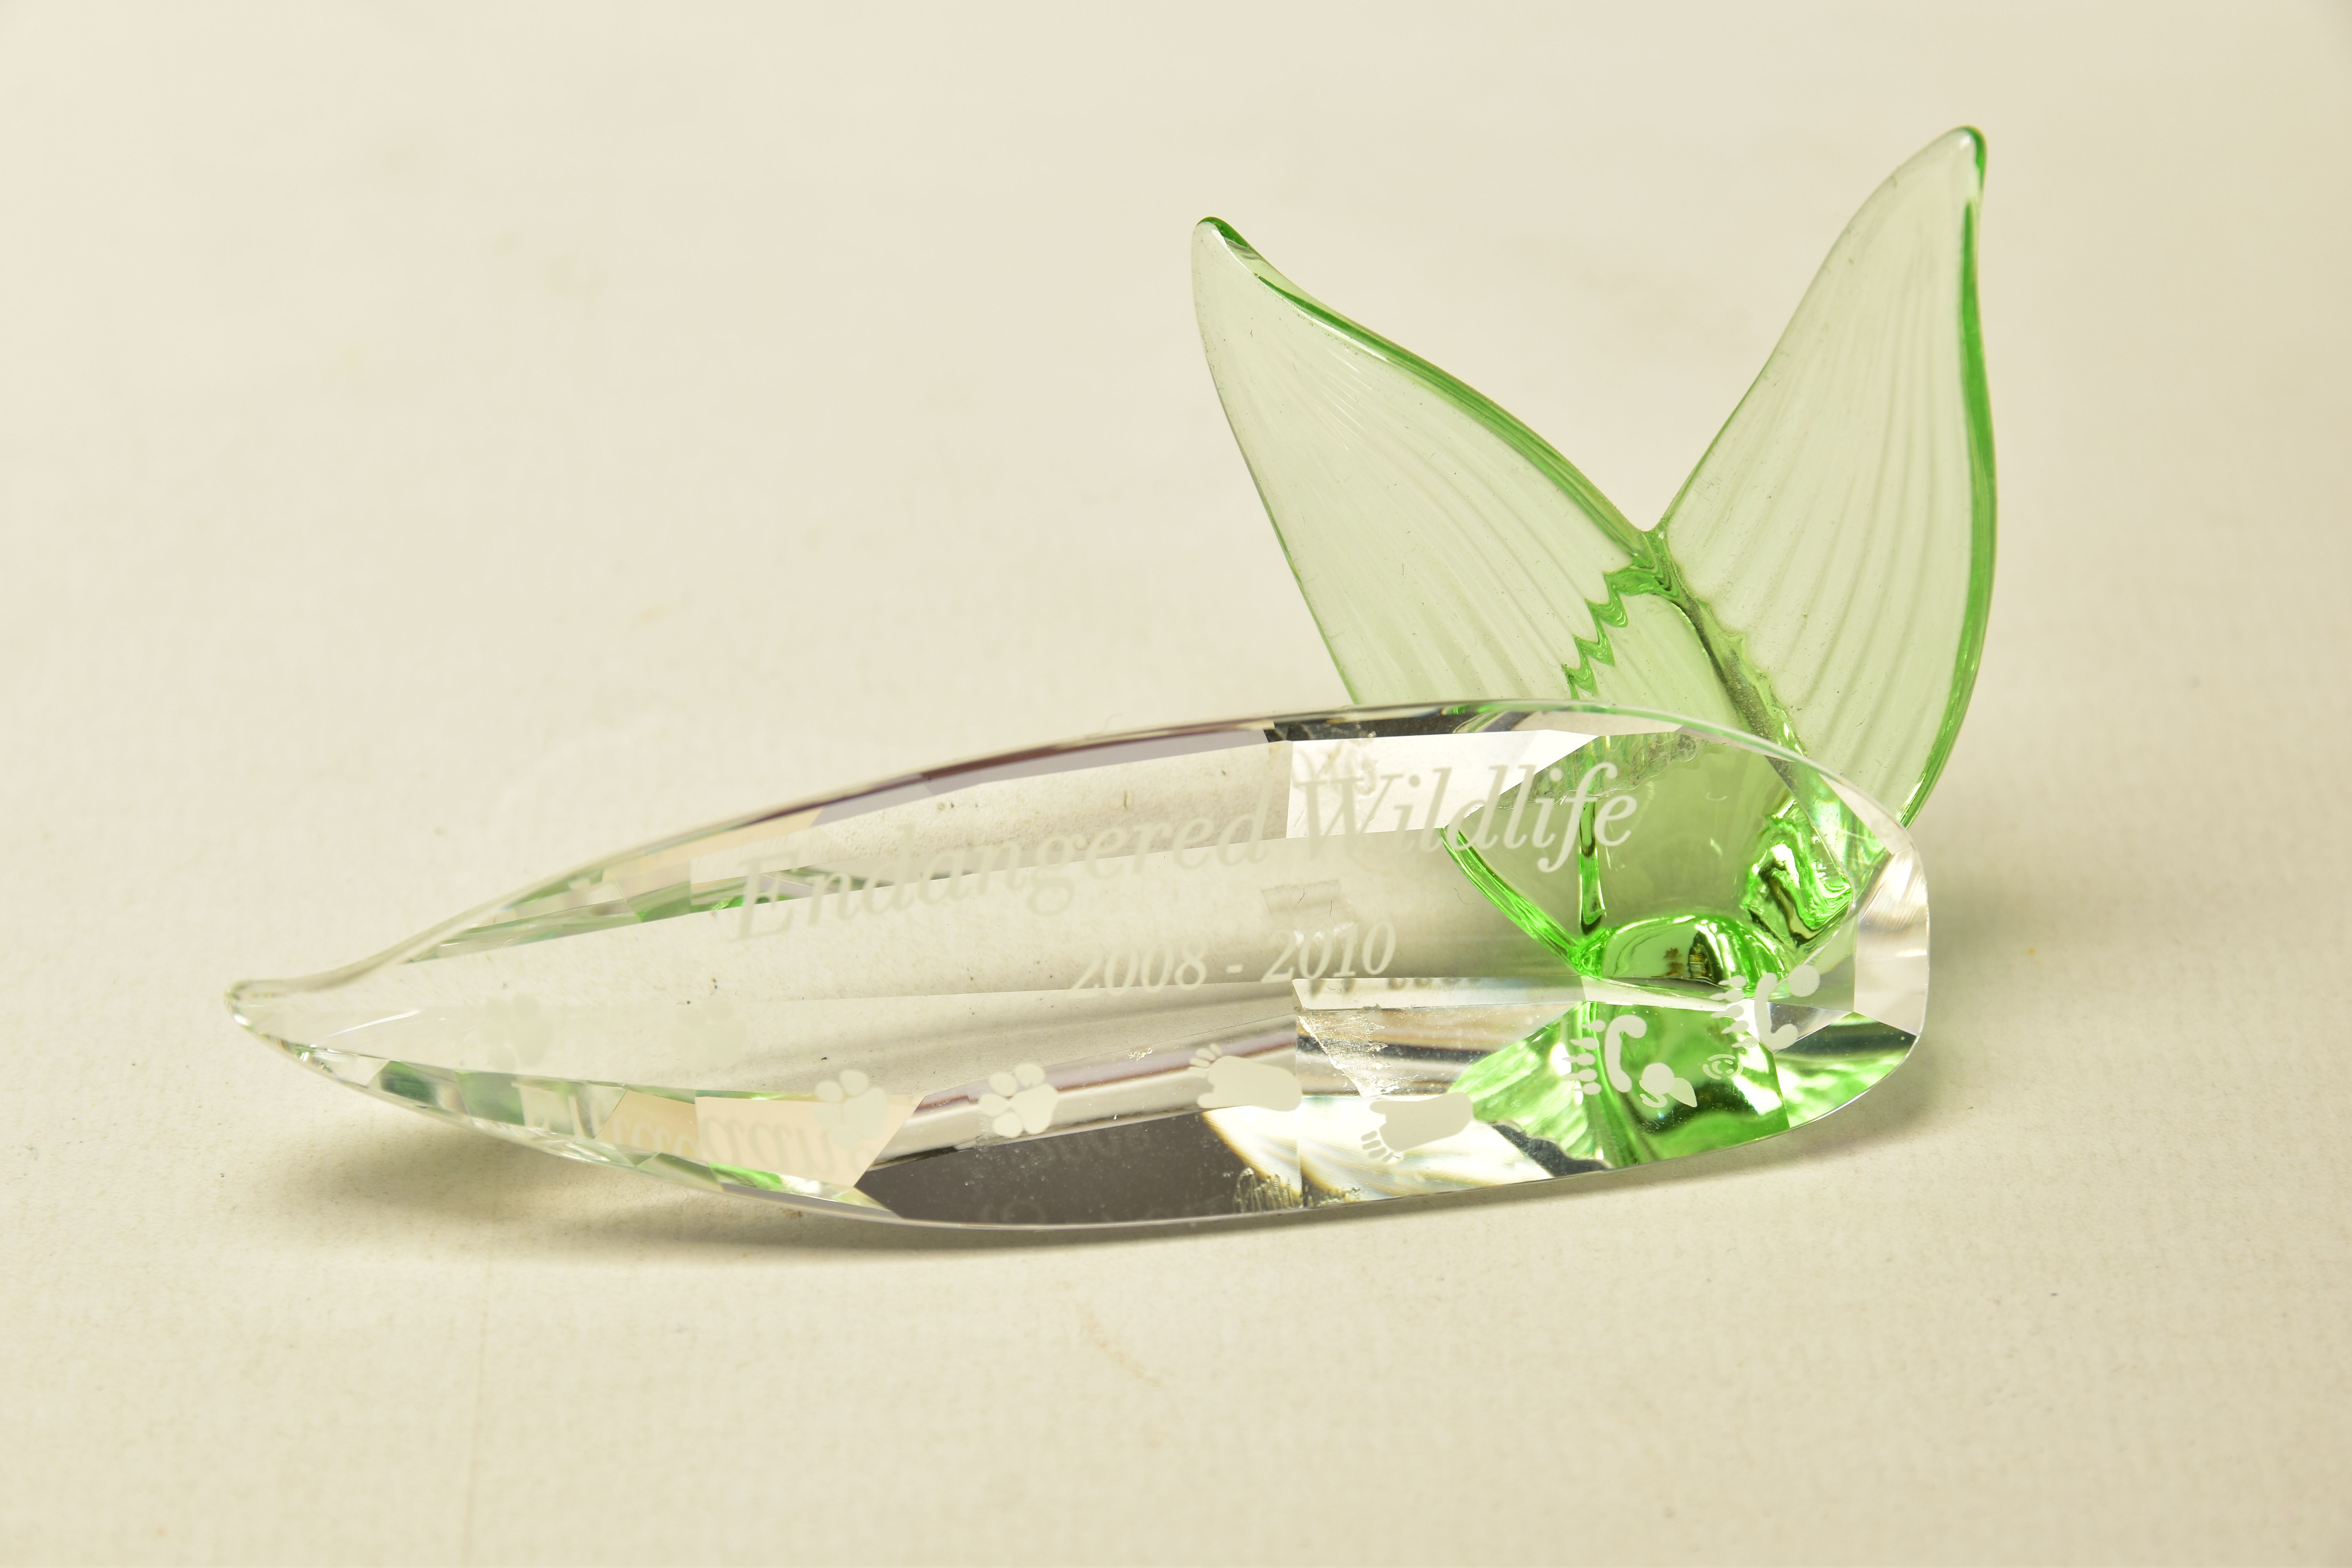 A BOXED SWAROVSKI CRYSTAL SOCIETY ENDANGERED WILDLIFE TITLE PLAQUE 2008-2010, (906929), height 4cm x - Image 2 of 4